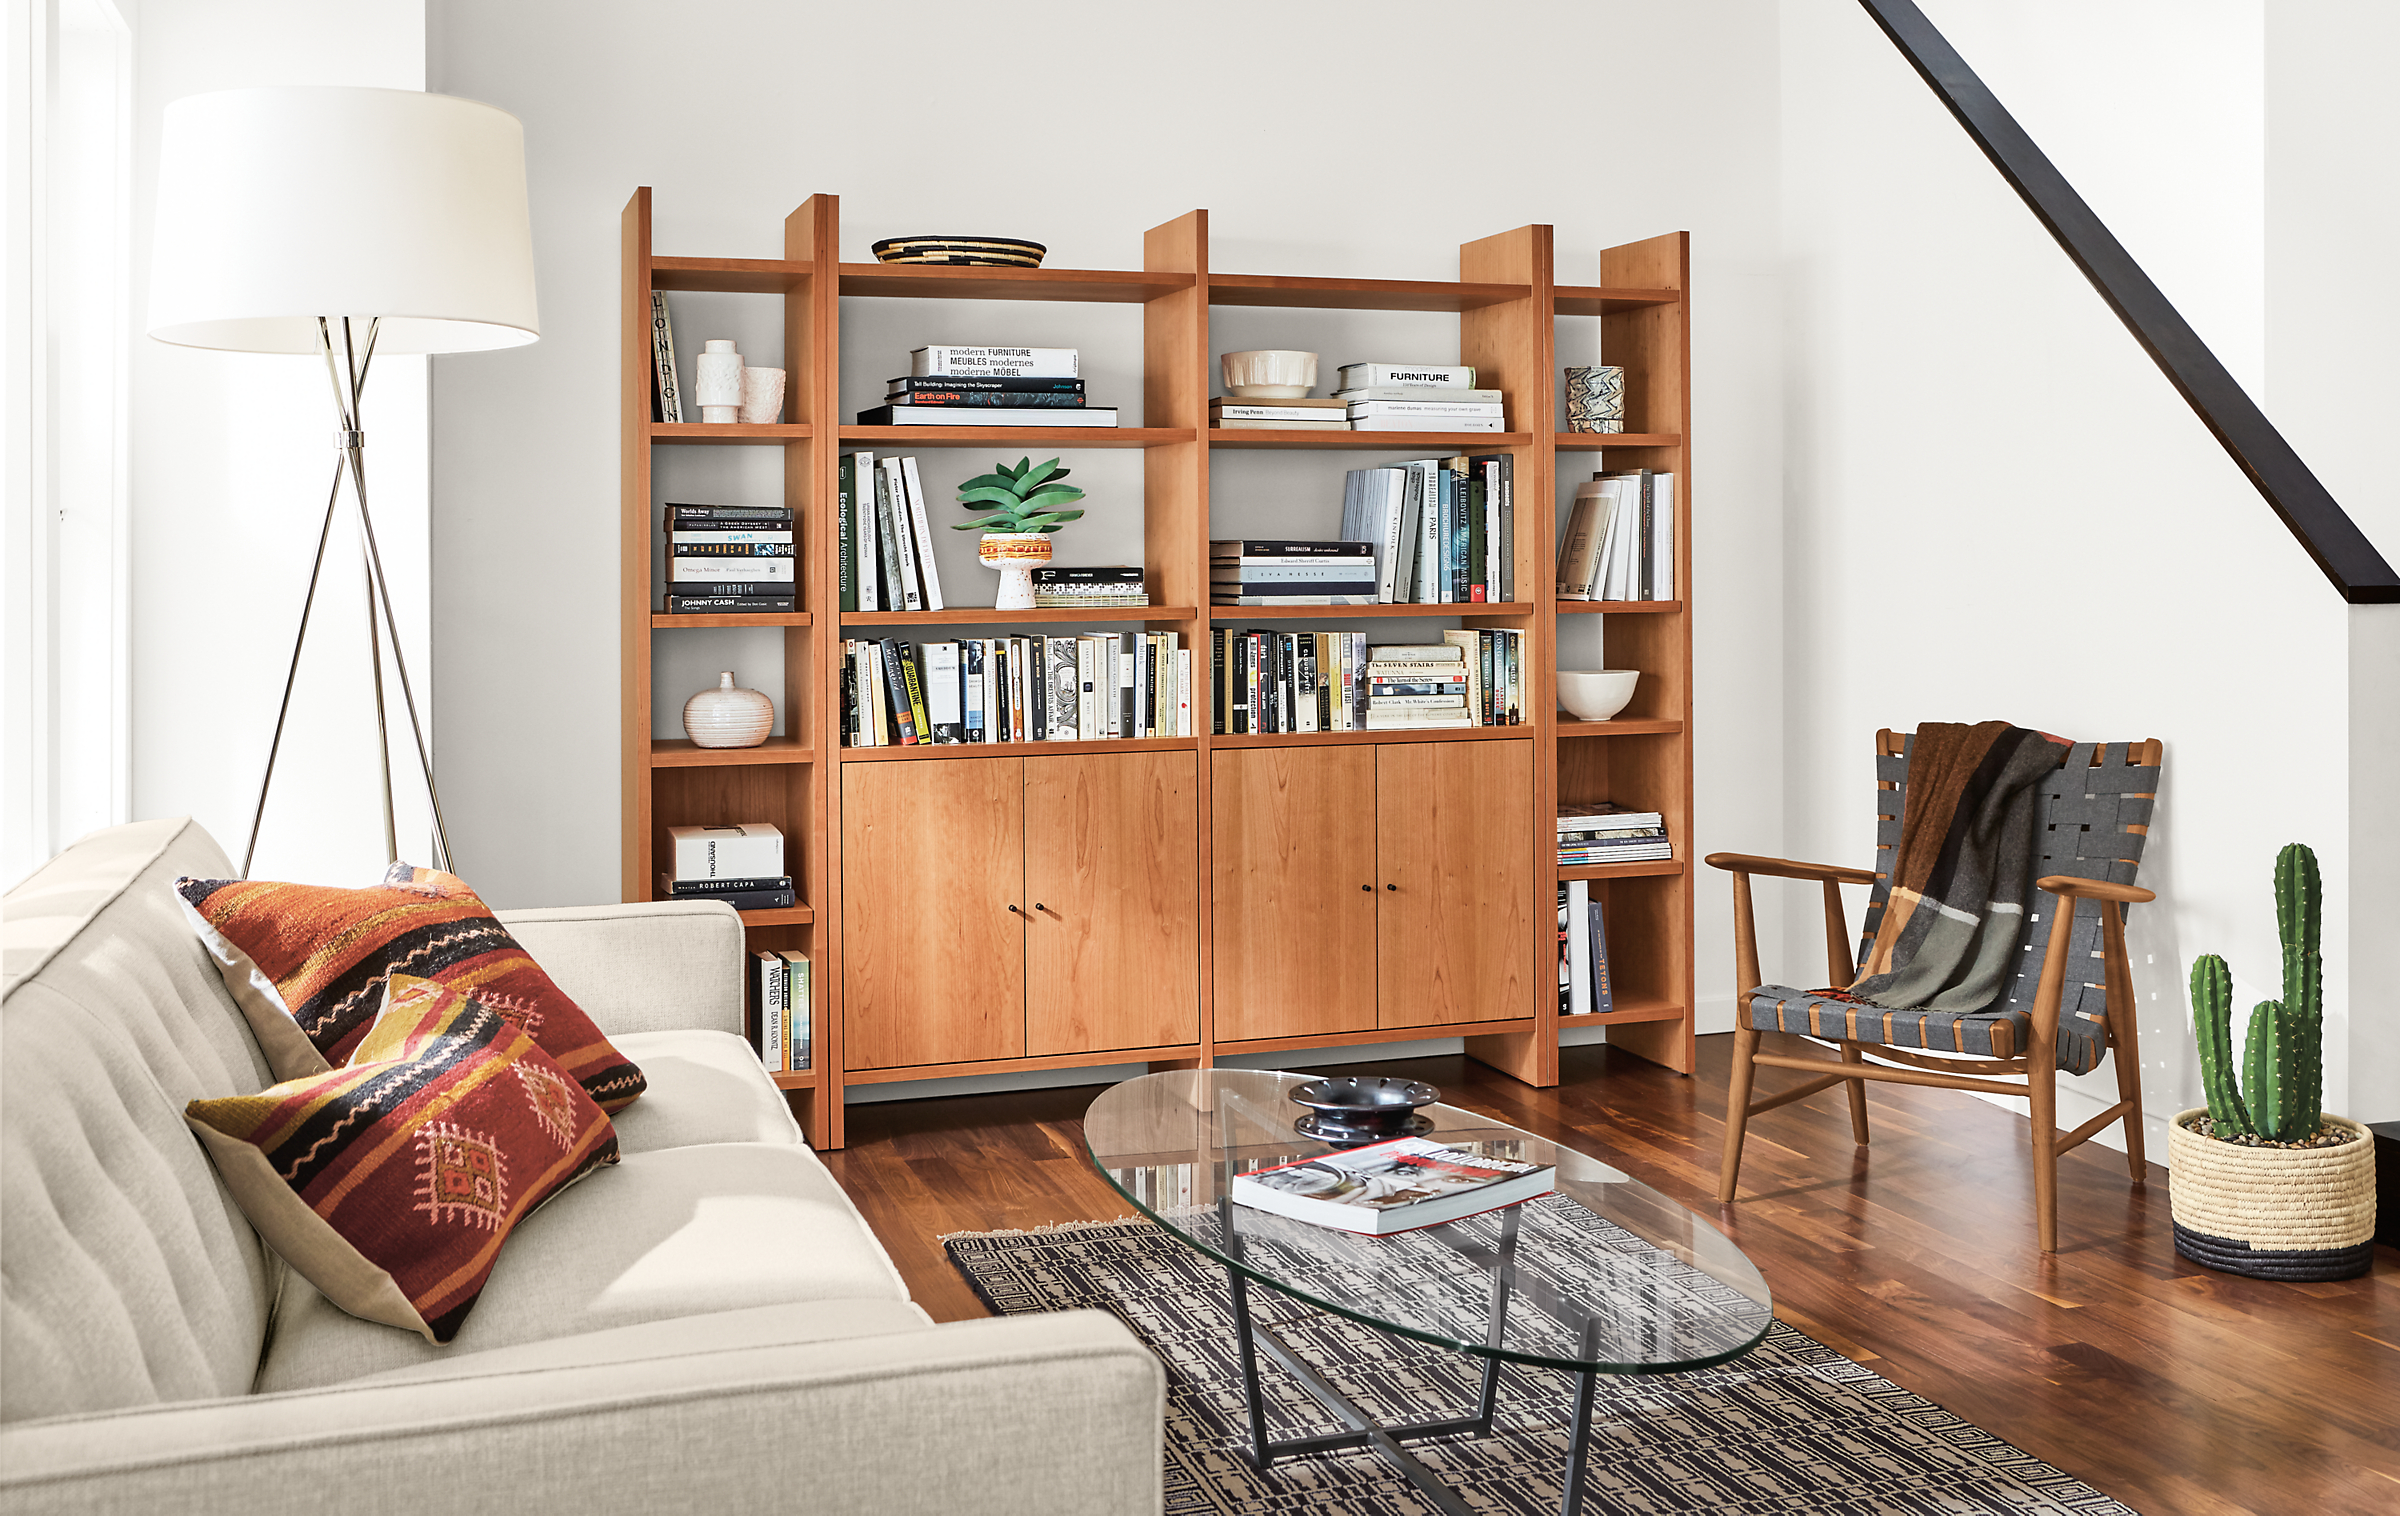 Four custom Addison bookcases in living space.